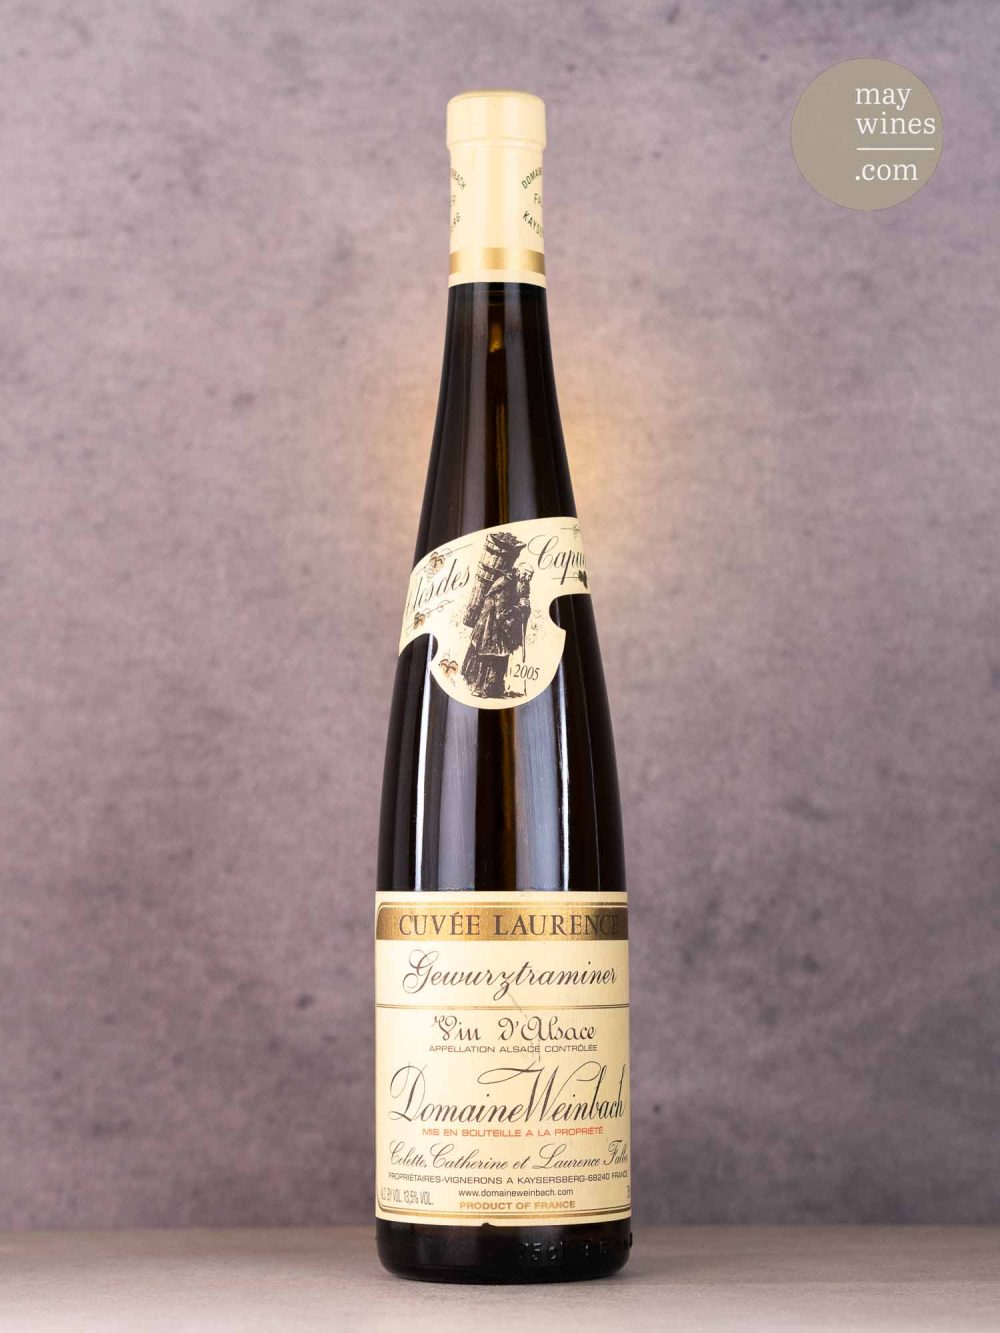 May Wines – Süßwein – 2005 Cuvée Laurence - Domaine Weinbach